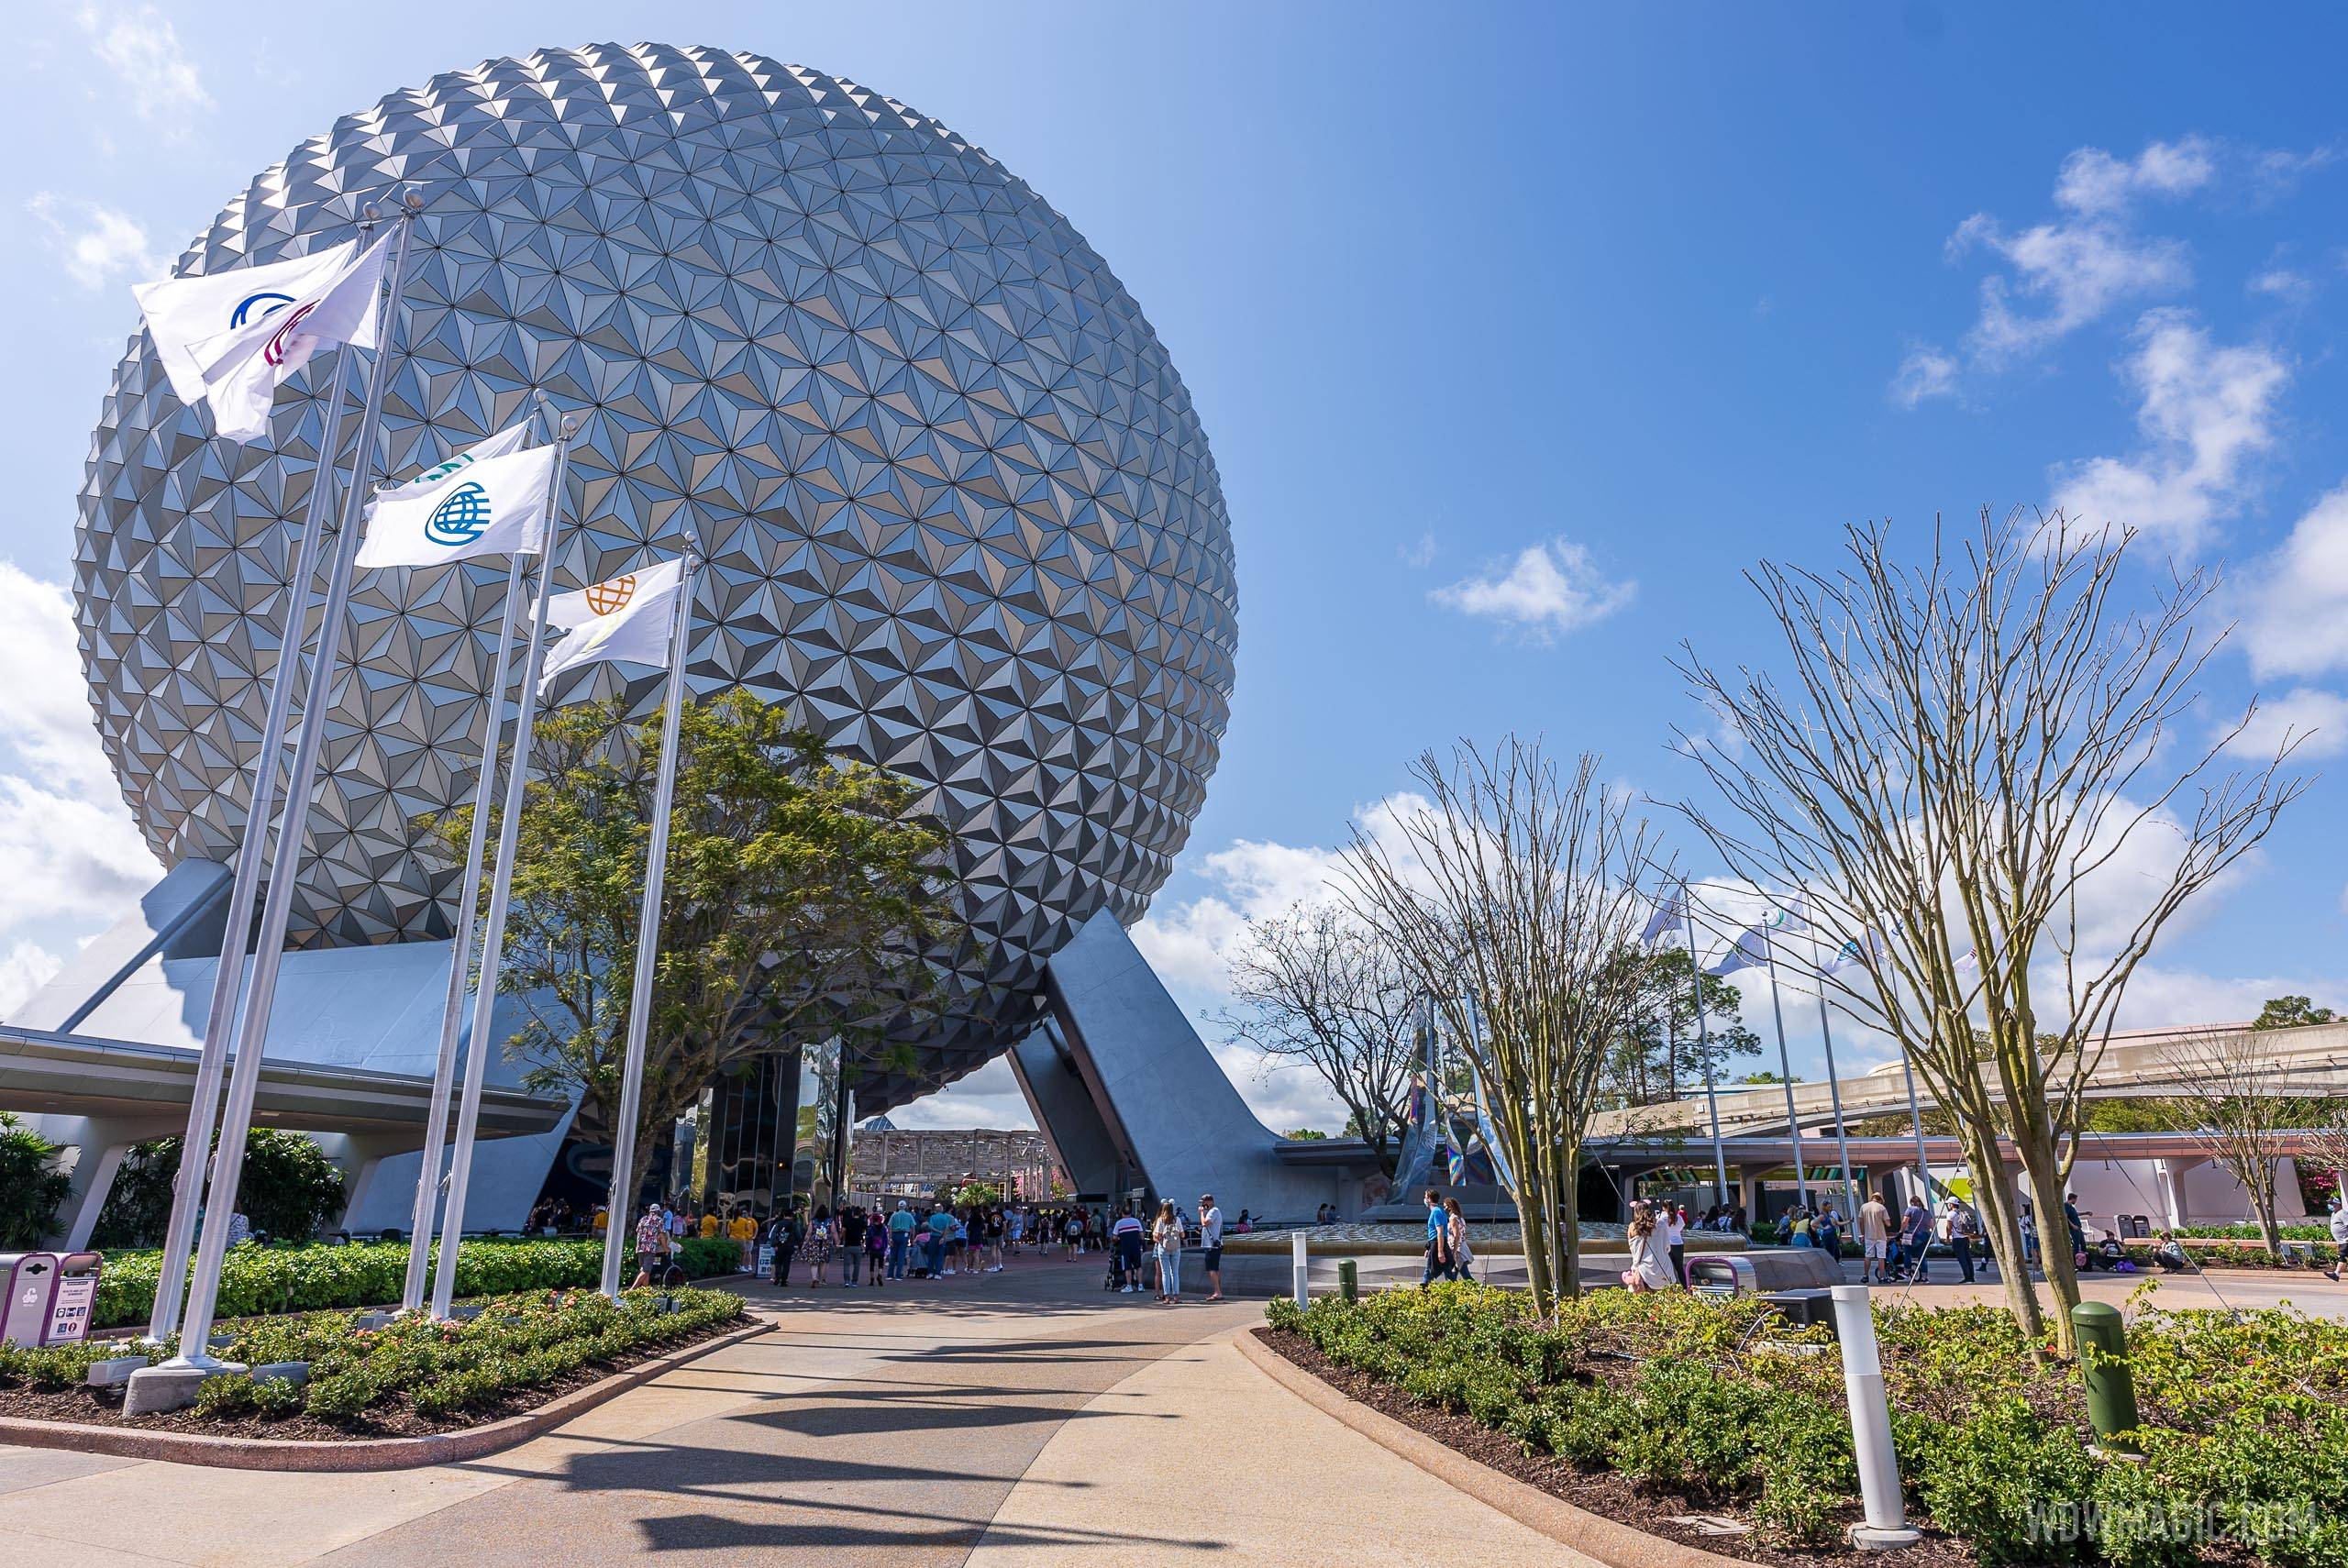 EPCOT continues its 9pm close into the second week of September